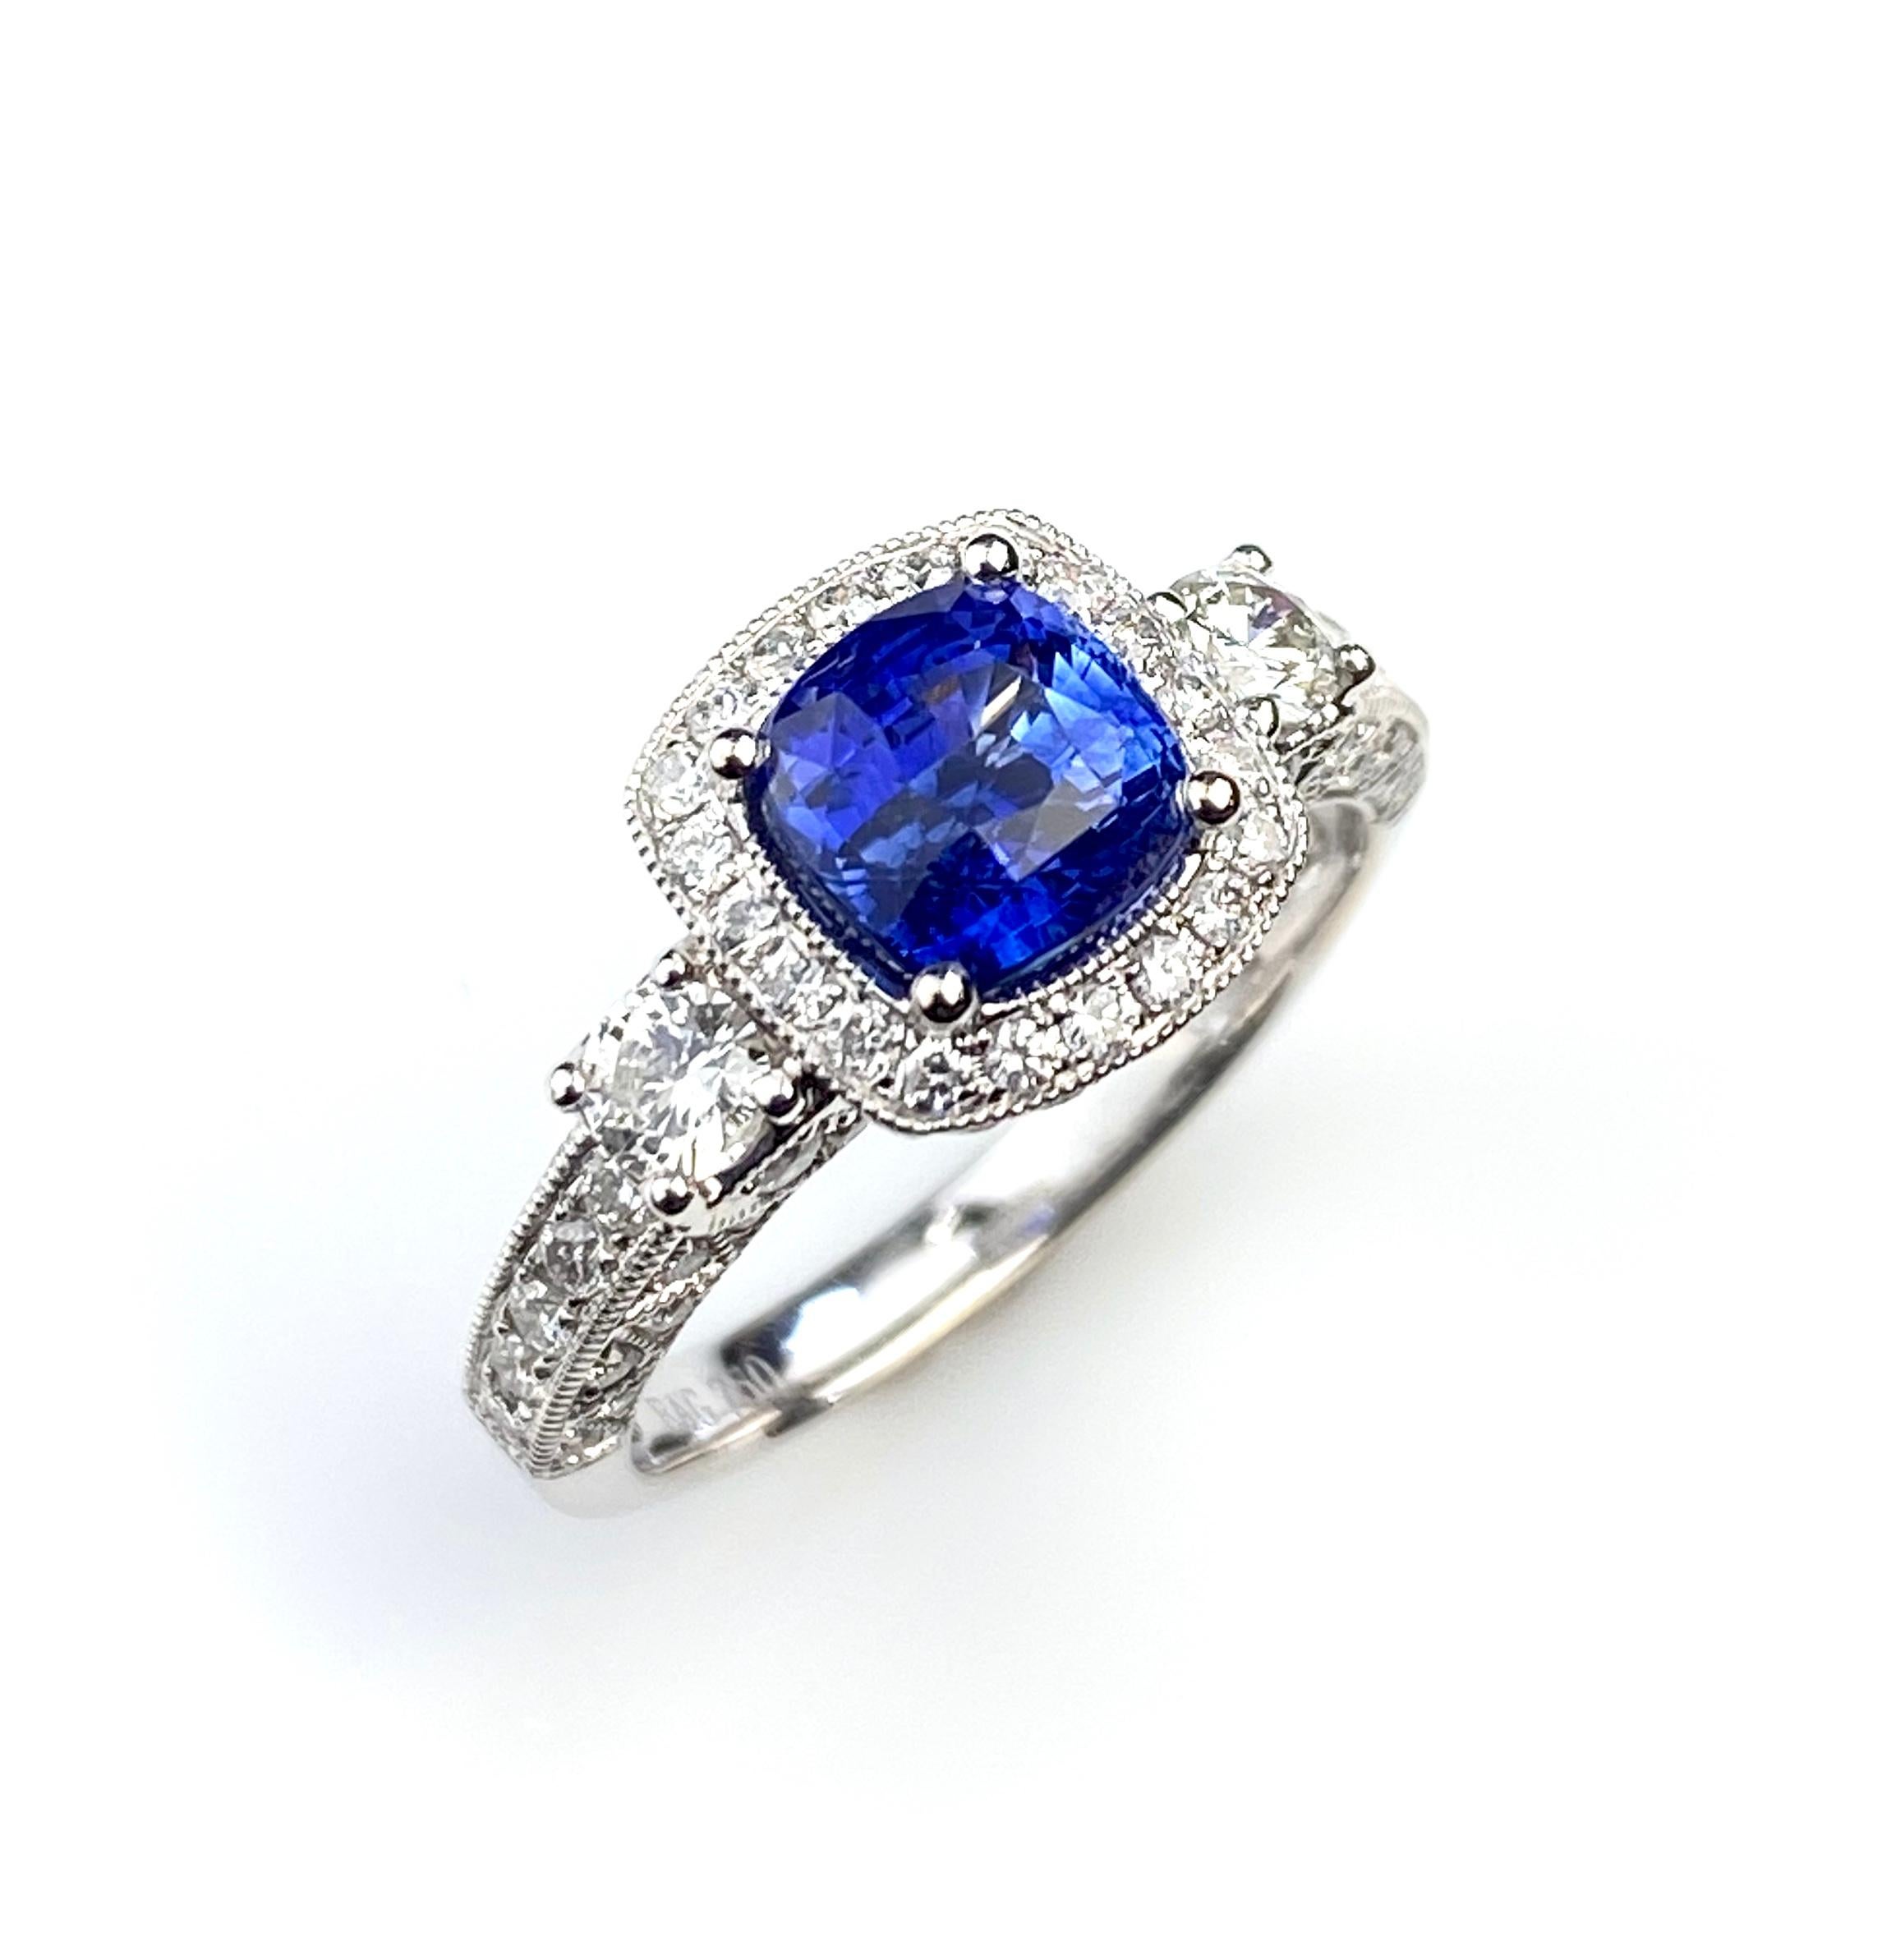 Cushion cut 1.78ct Blue Sapphire in an antique style 18kt white gold ring setting. Detailed with 0.73ct total of diamonds micro set around the centre gem and on the band. Current ring size 5 1/2. Complementary ring sizing up or down two sizes.